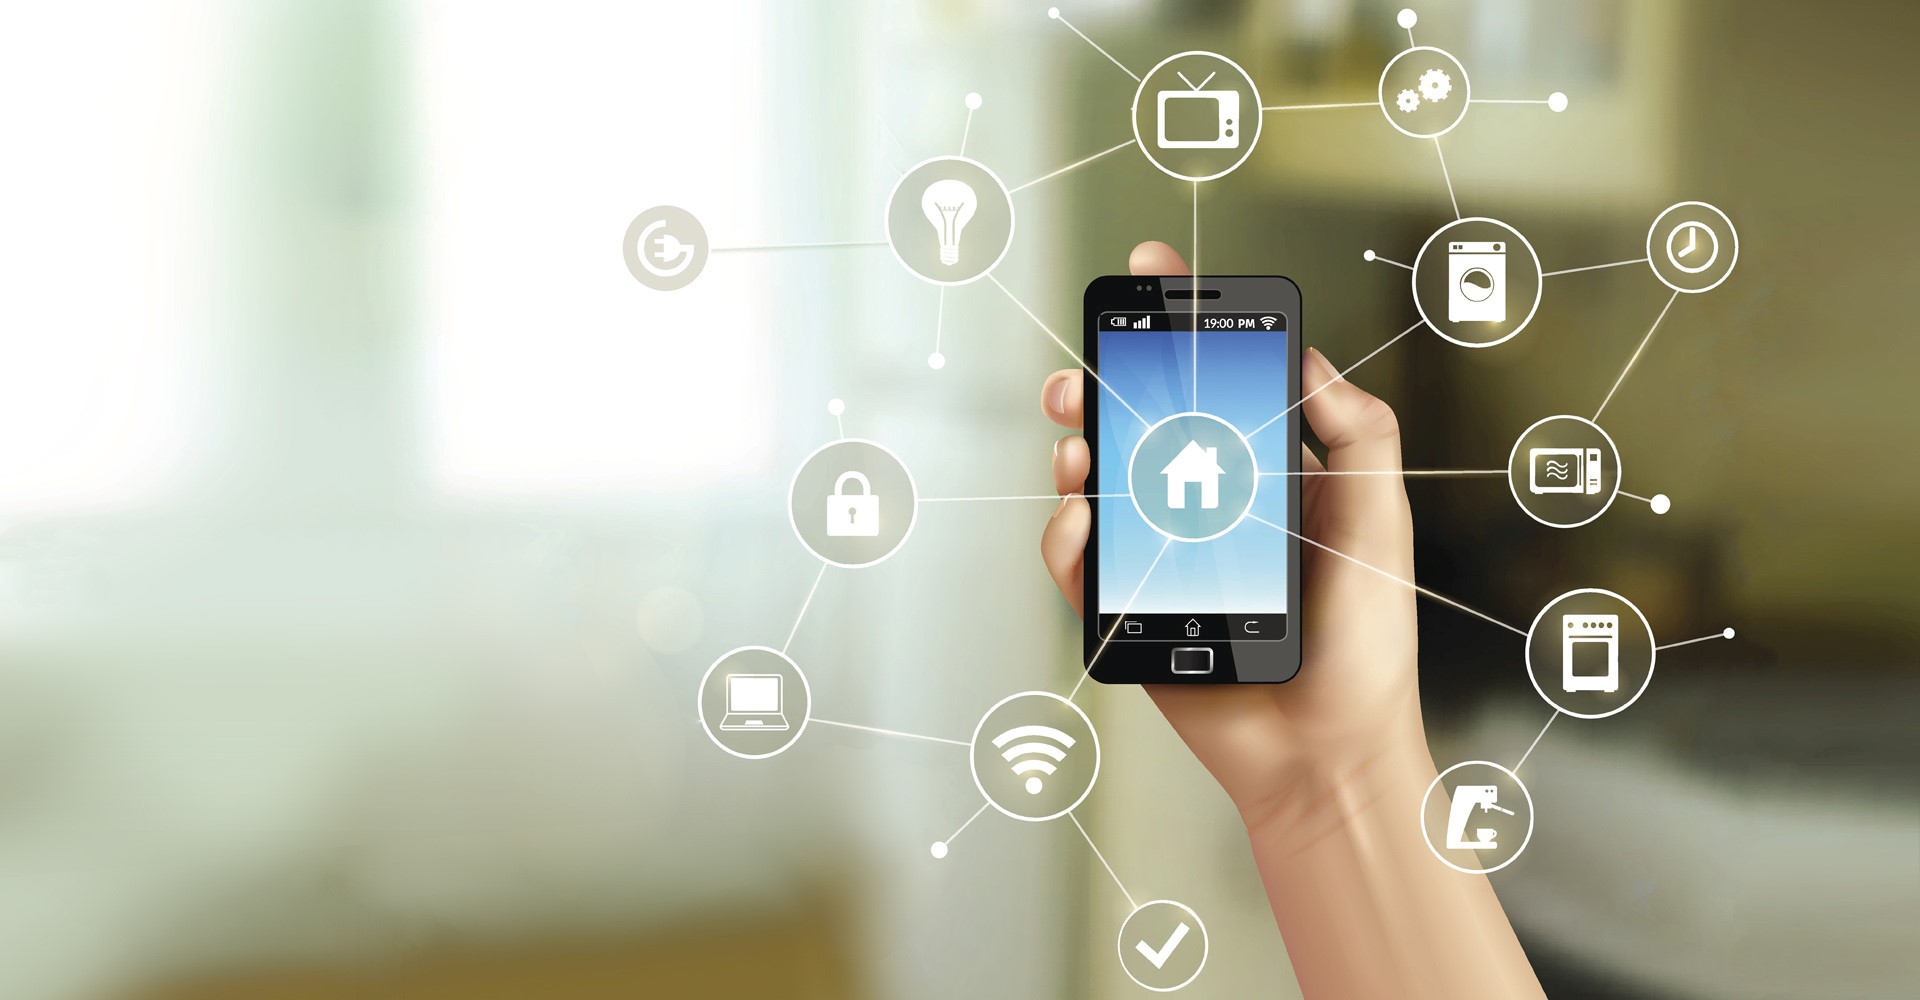 Avast Smart Life protects the growing number of IoT devices in